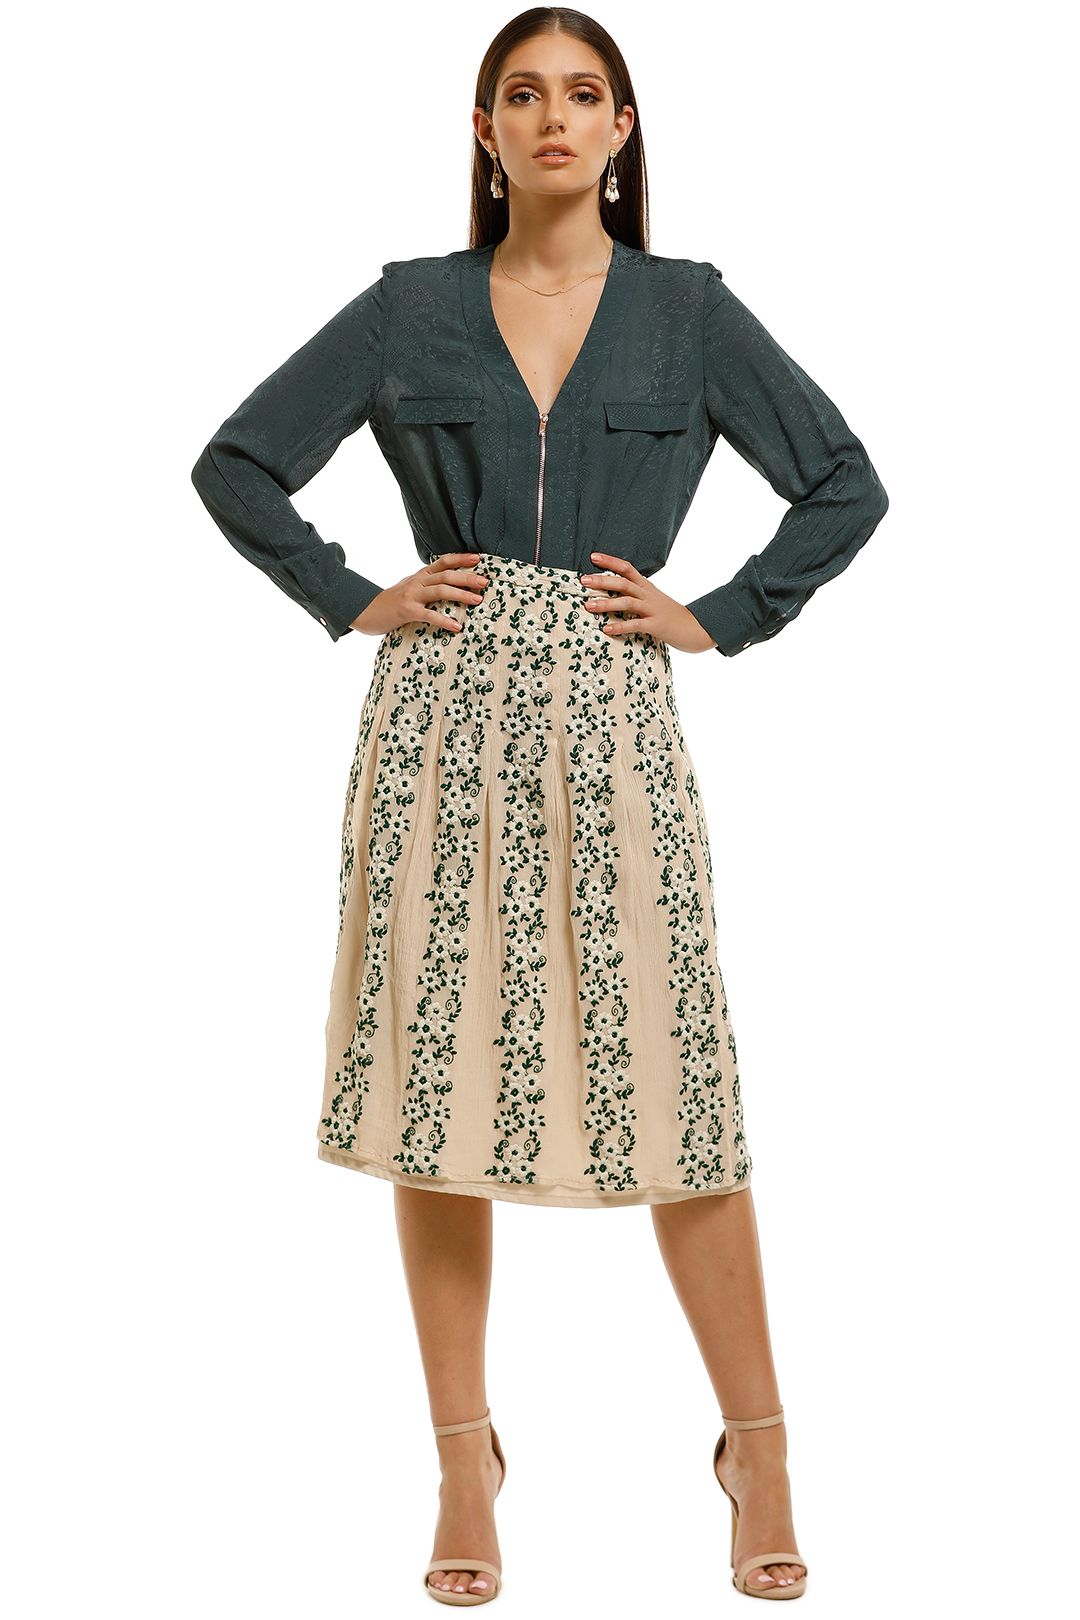 Daisy Skirt by Moss and Spy for Hire | GlamCorner